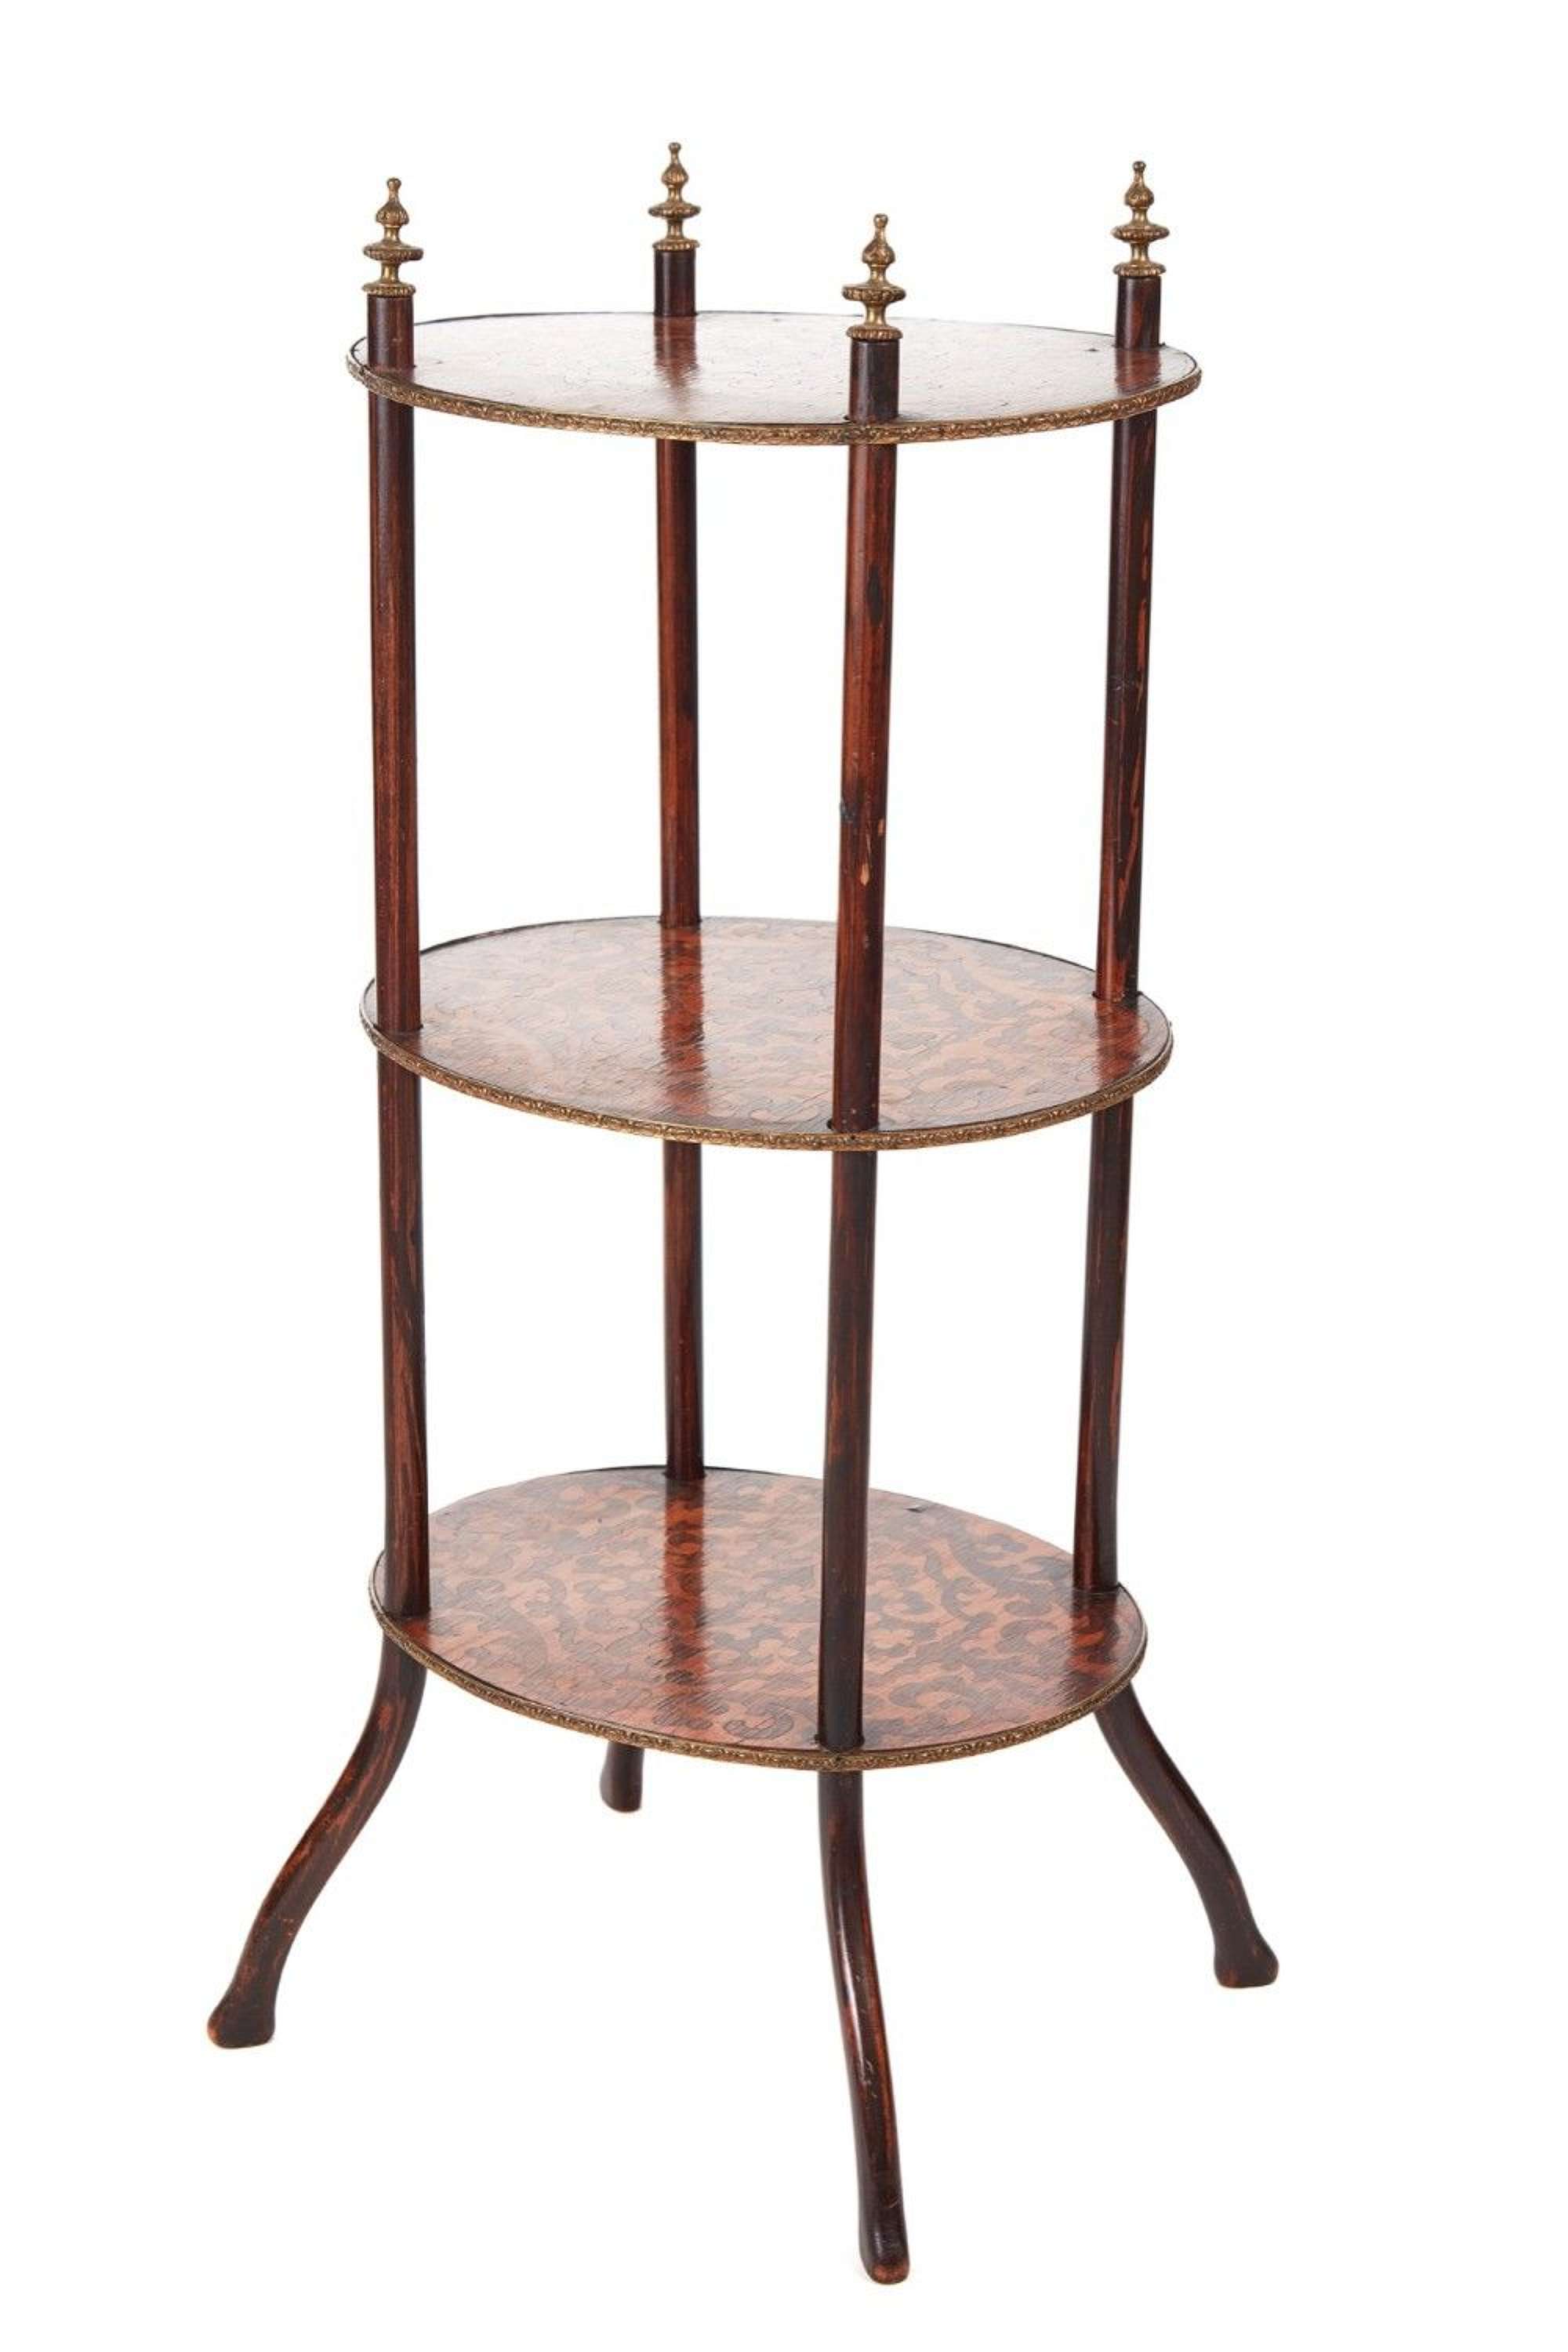 19th Century Victorian Antique Three Tier Oval Inlaid Stand